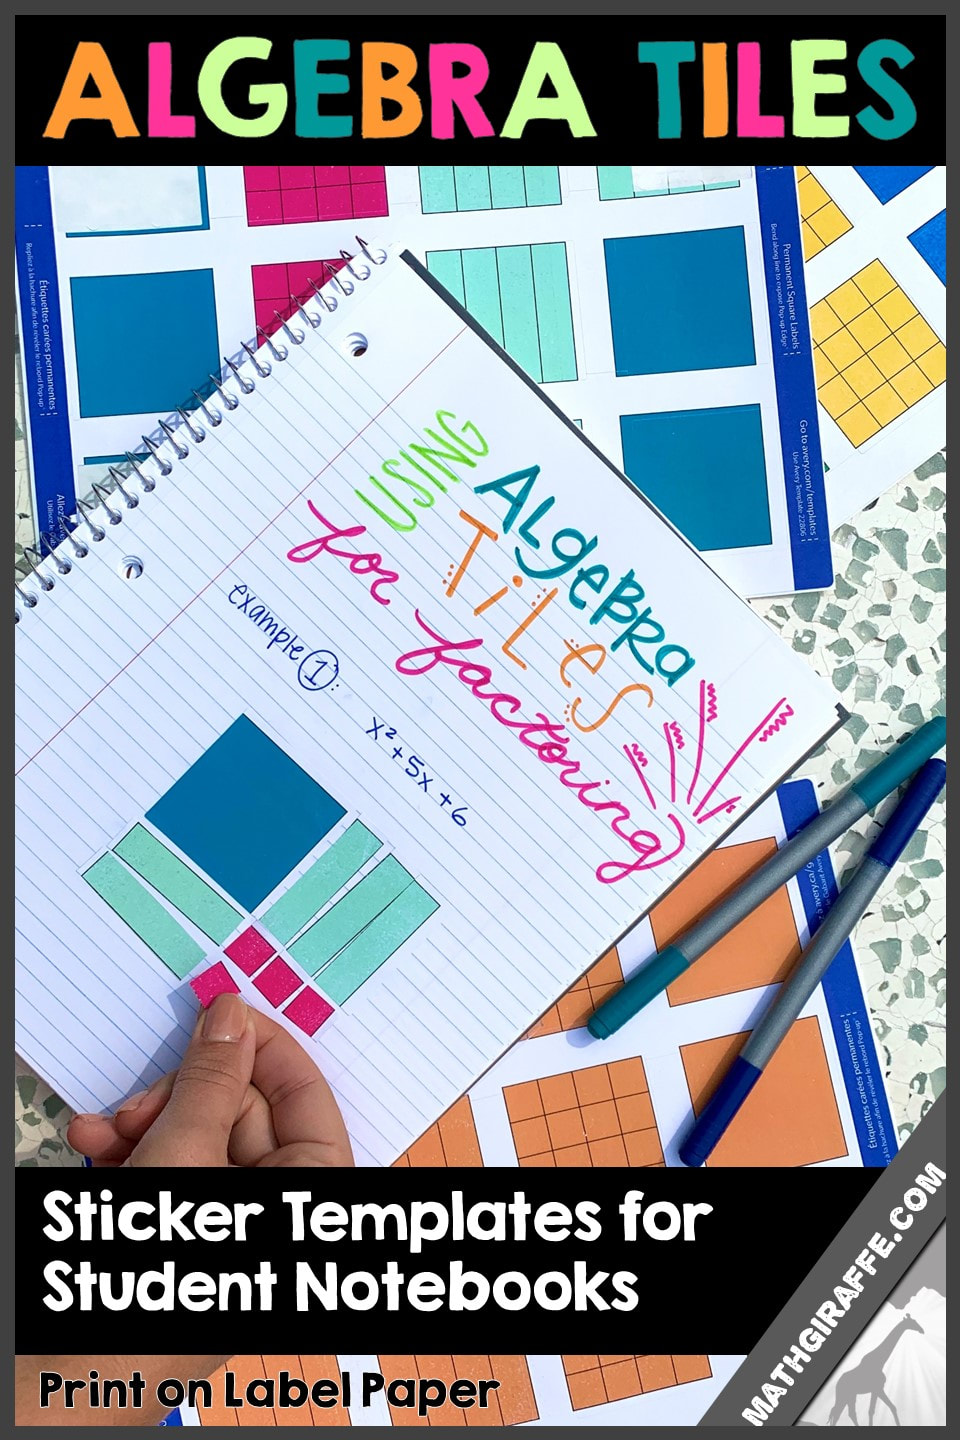 Free Algebra Tiles as Stickers for Notebooks